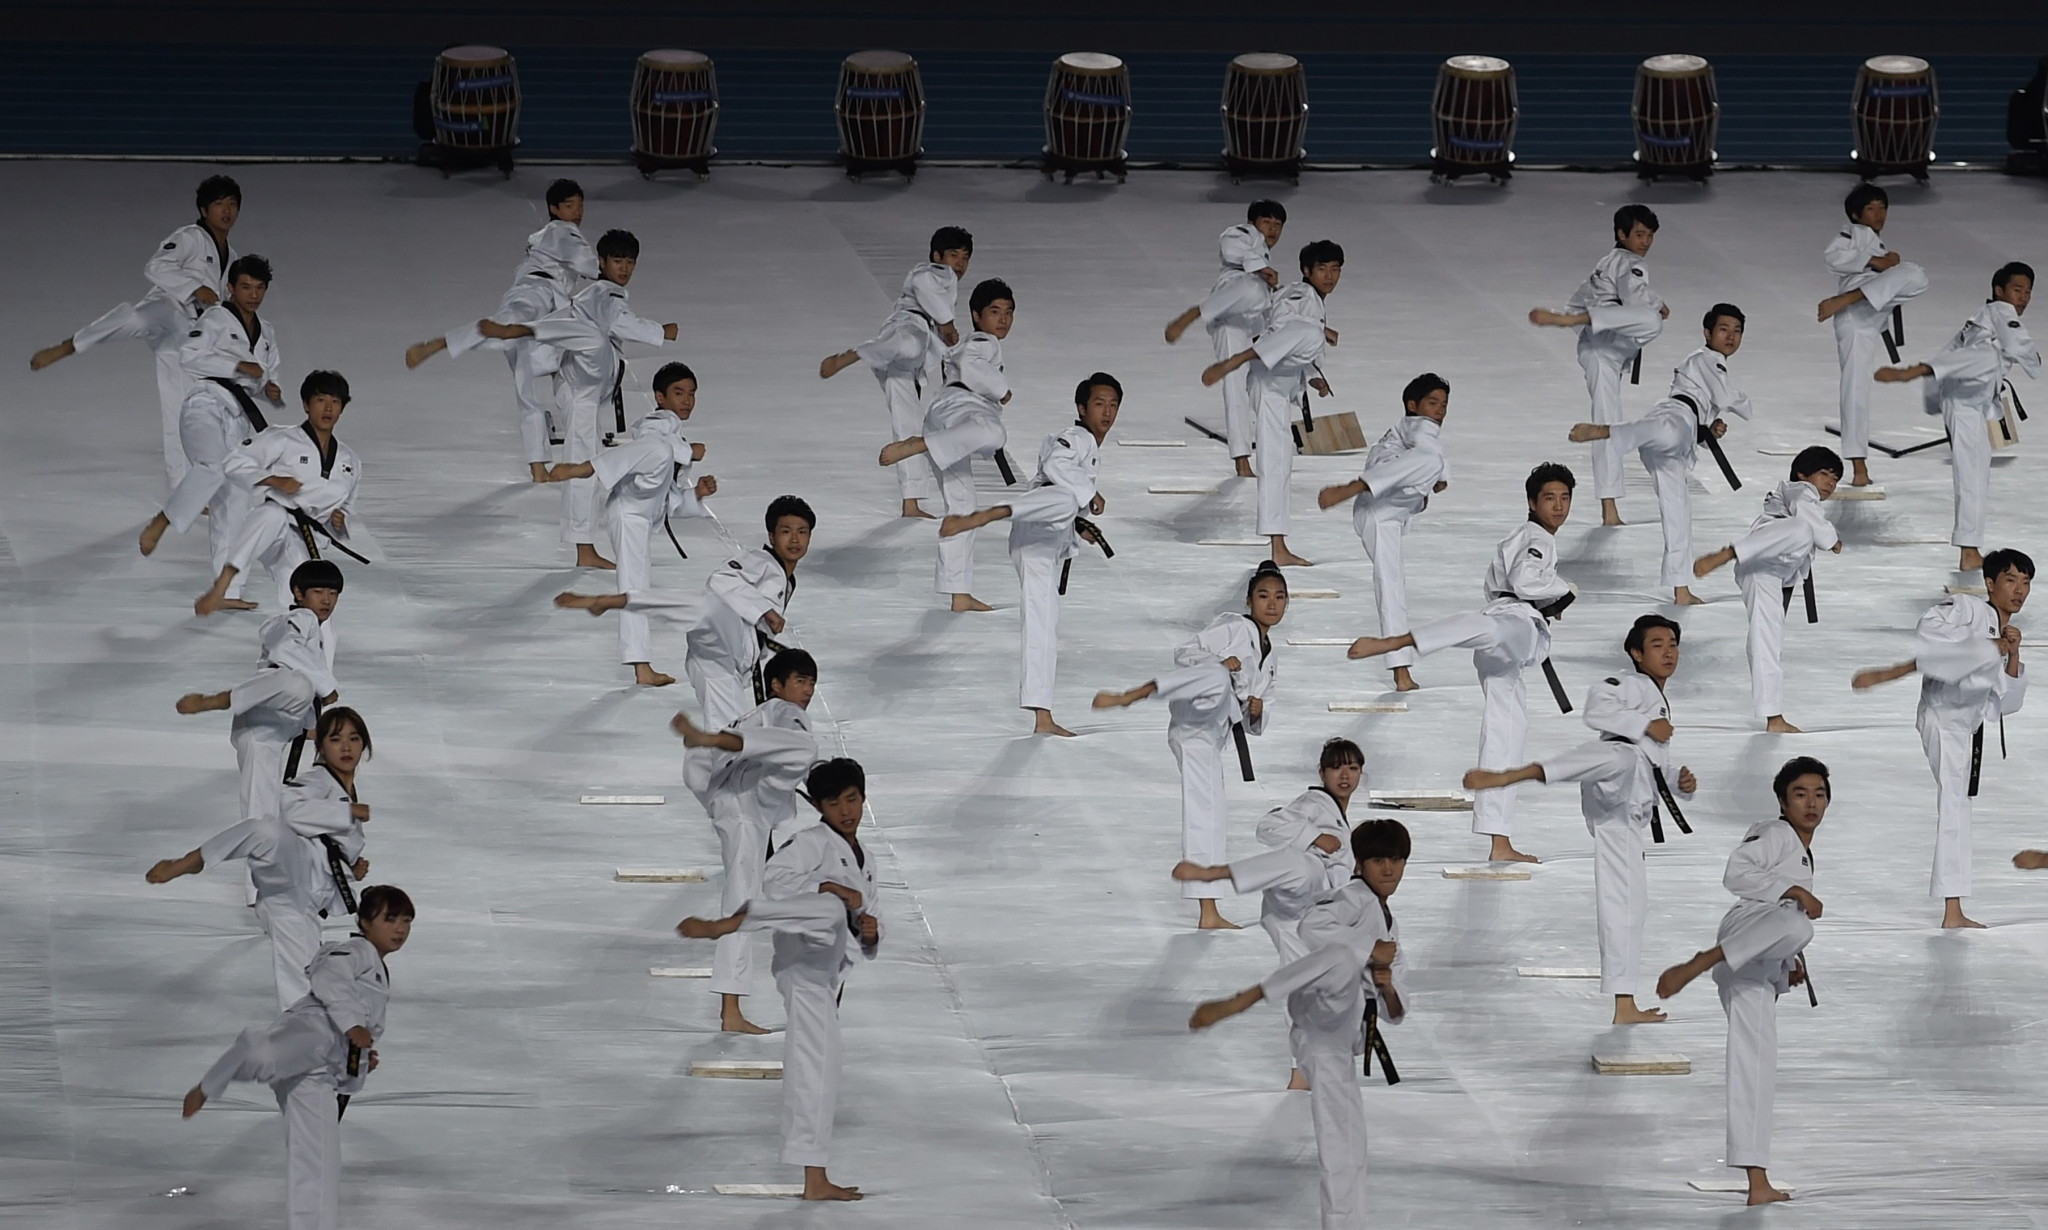 Members of Kukkiwon, World Taekwondo Headquarters, perform during the Closing Ceremony of the 2014 Asian Games ©Getty Images